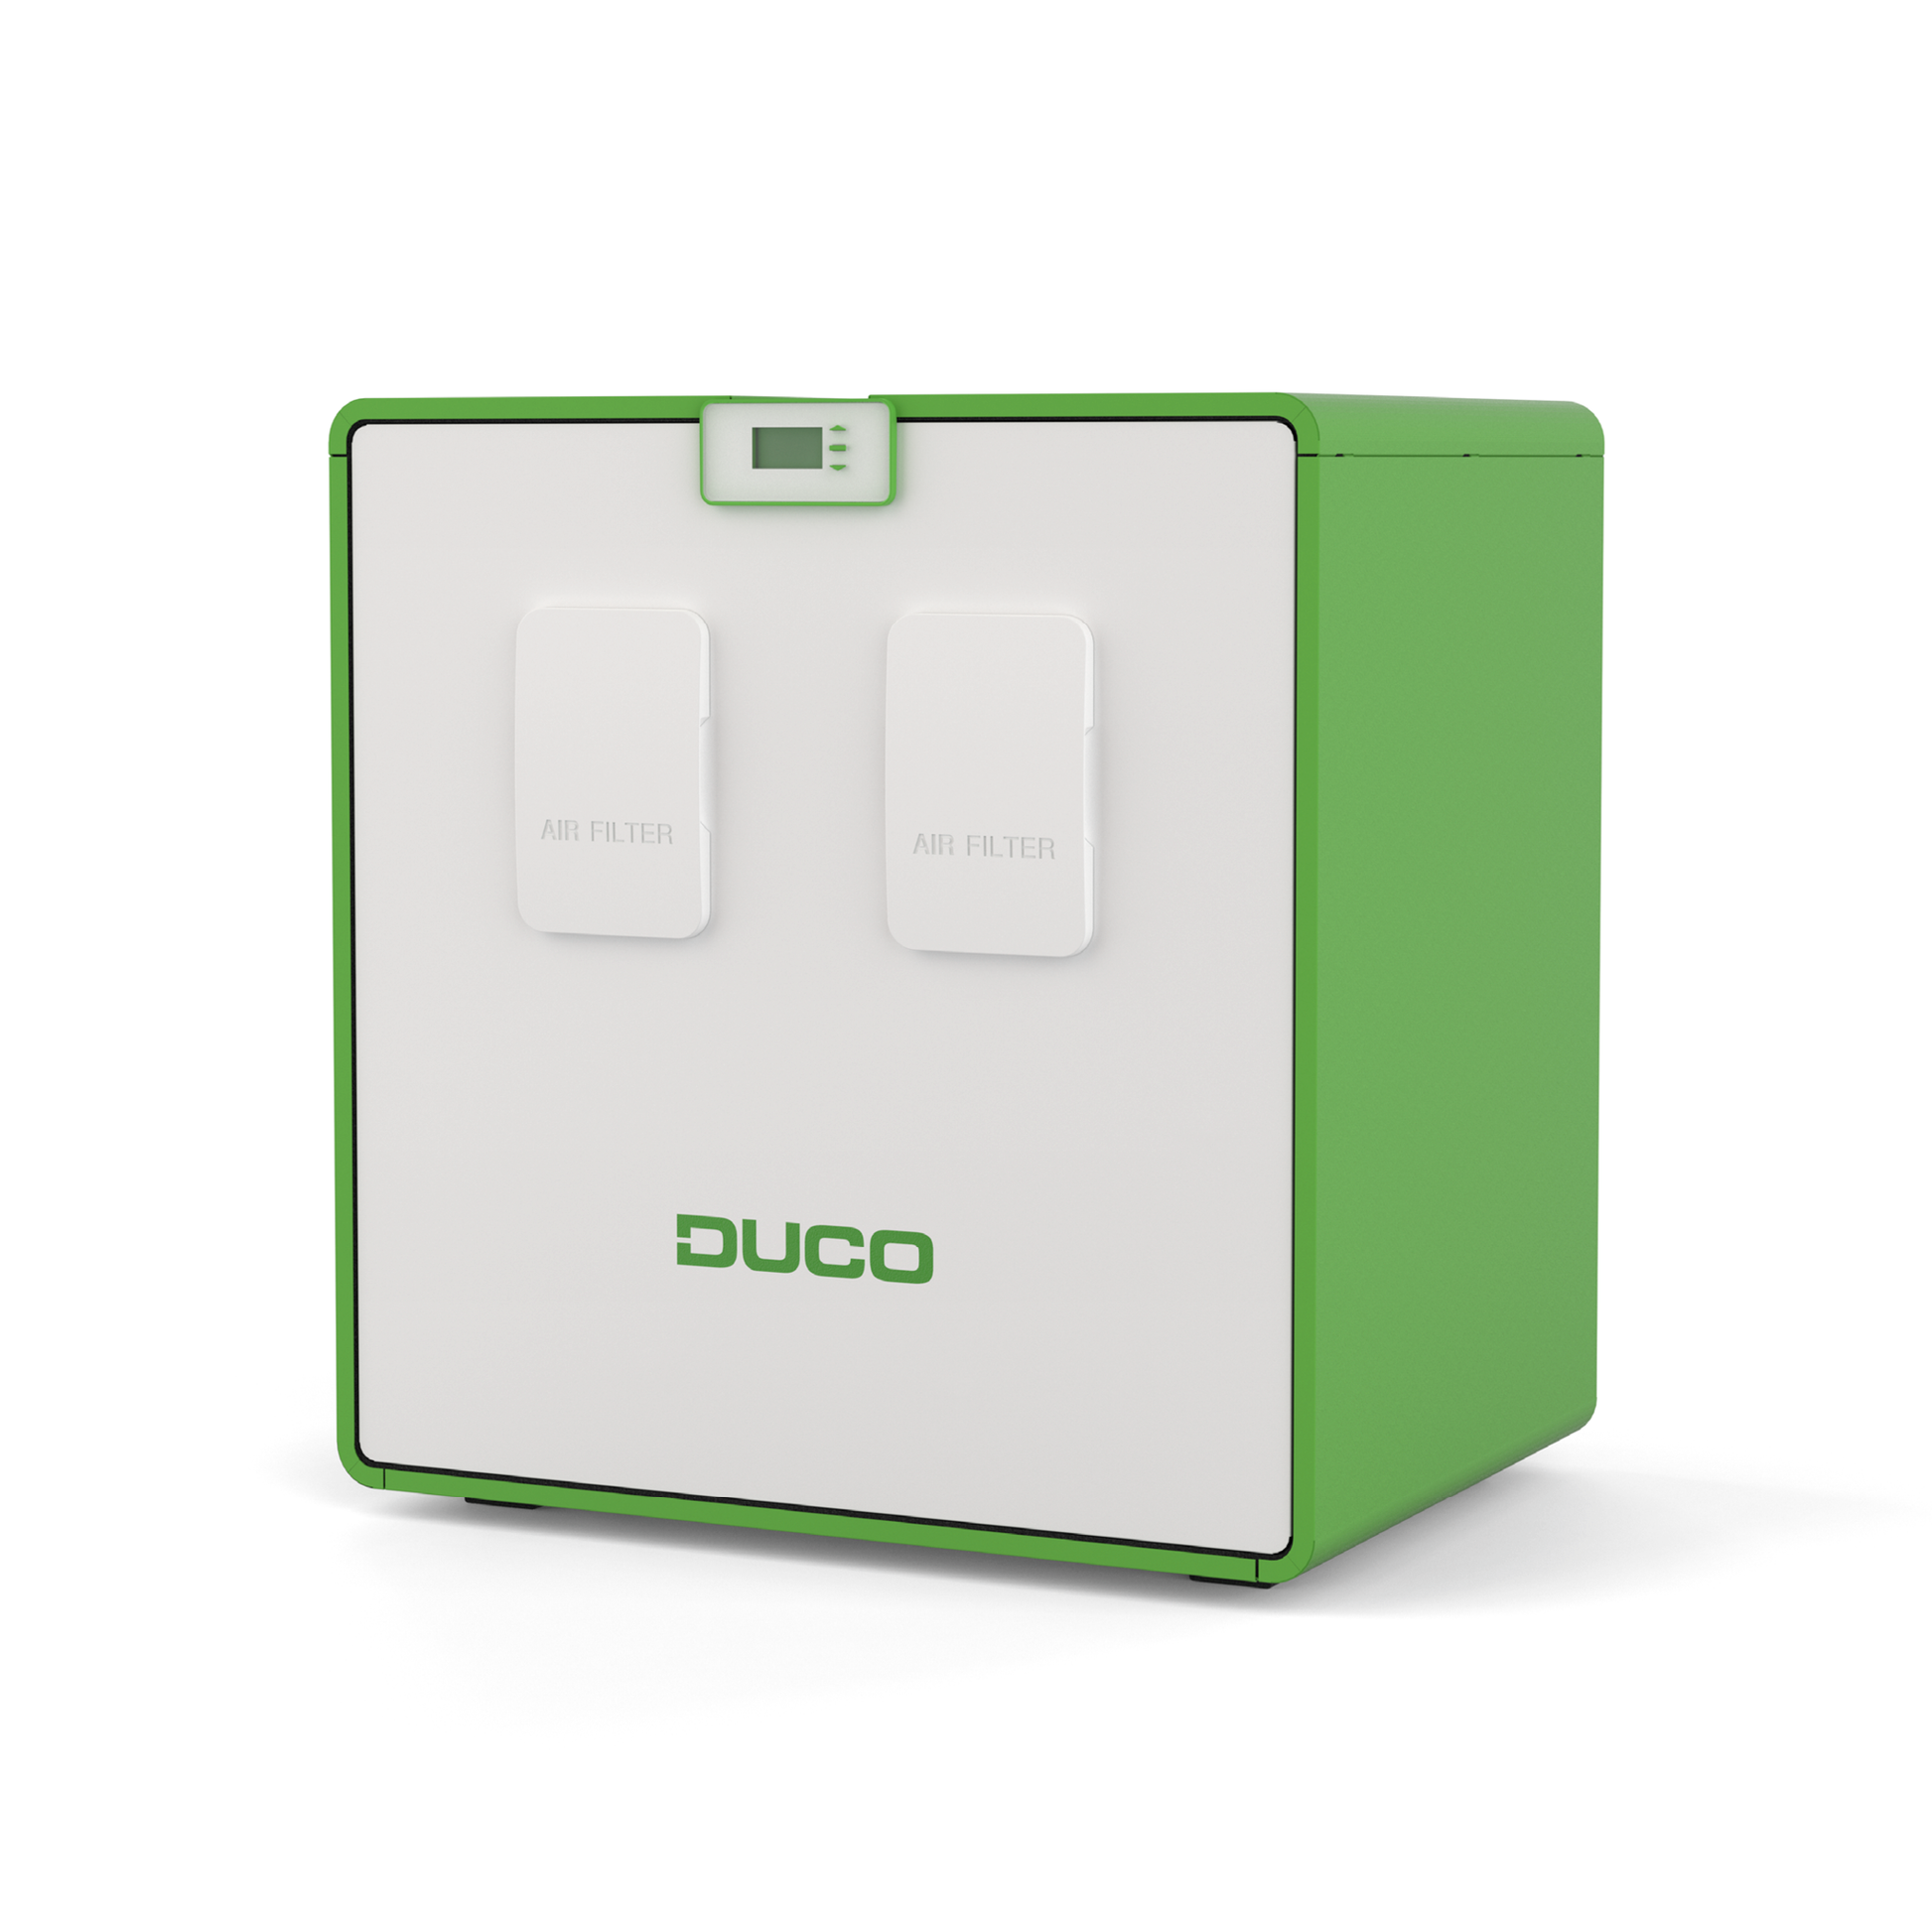 Product image DucoBox Energy Comfort Plus (green casing)